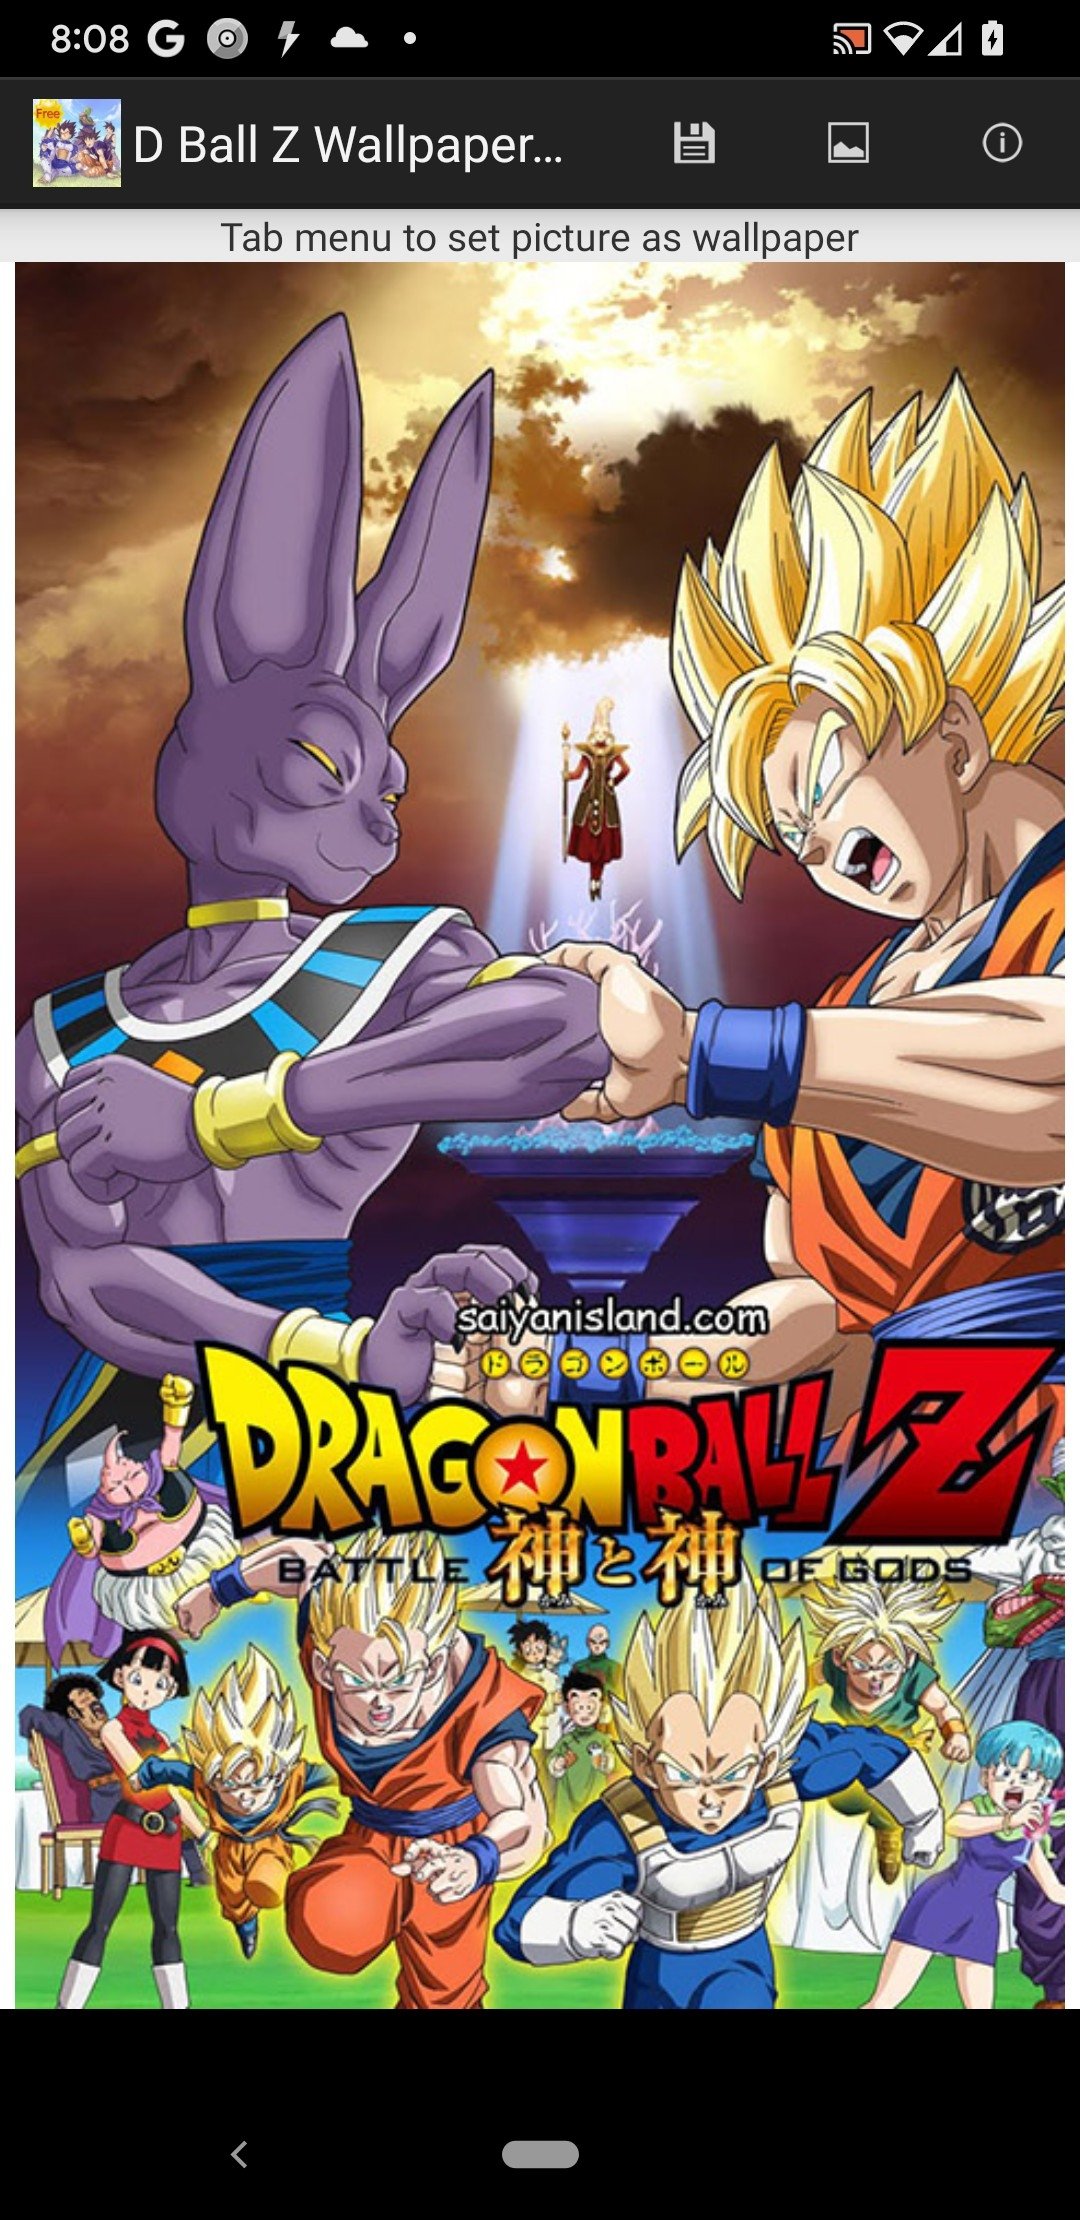 D Ball Z Wallpaper APK download - D Ball Z Wallpaper for Android Free